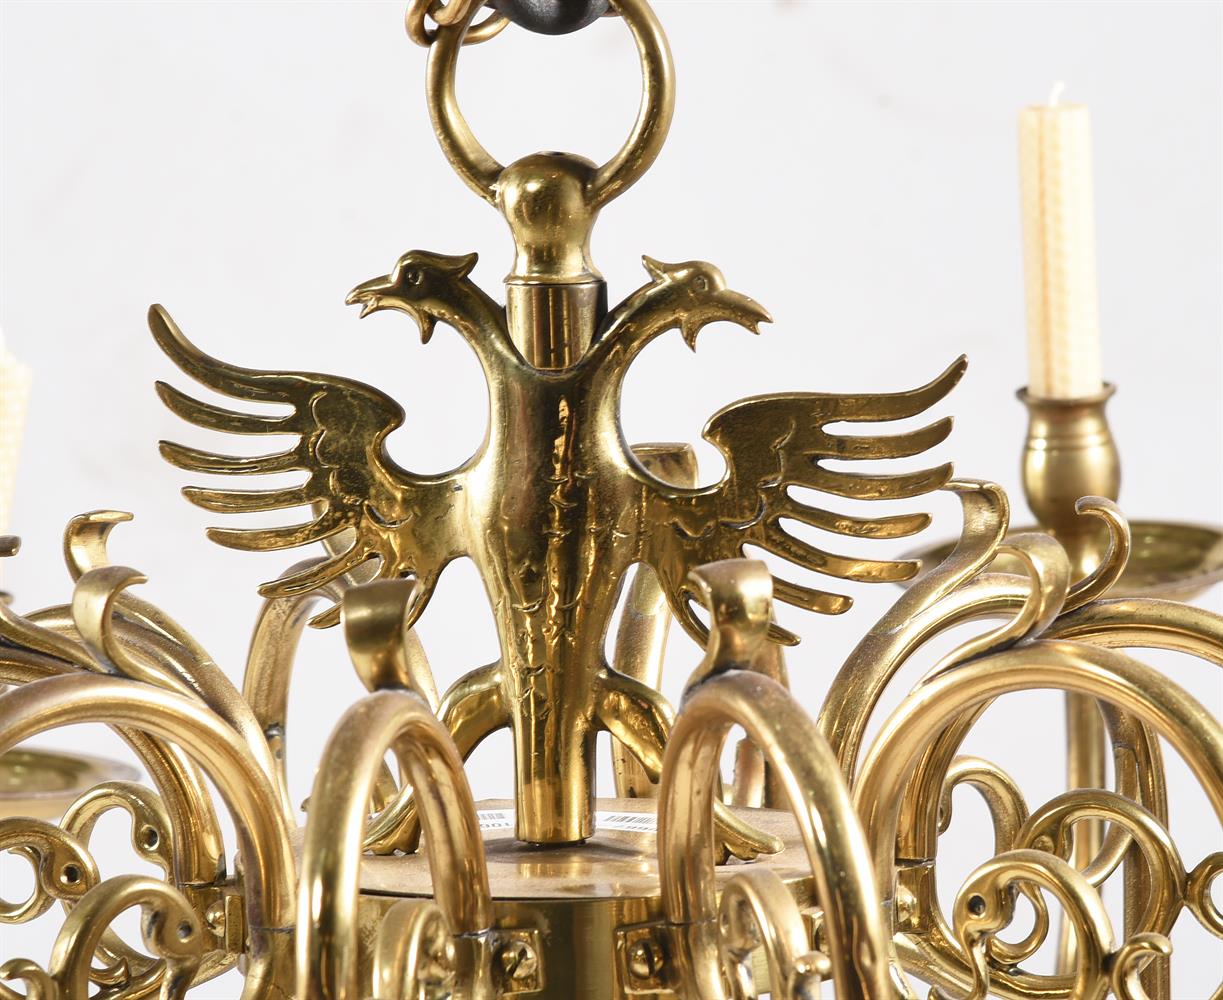 A BRASS CHANDELIER IN DUTCH 17TH CENTURY STYLE - Image 2 of 3